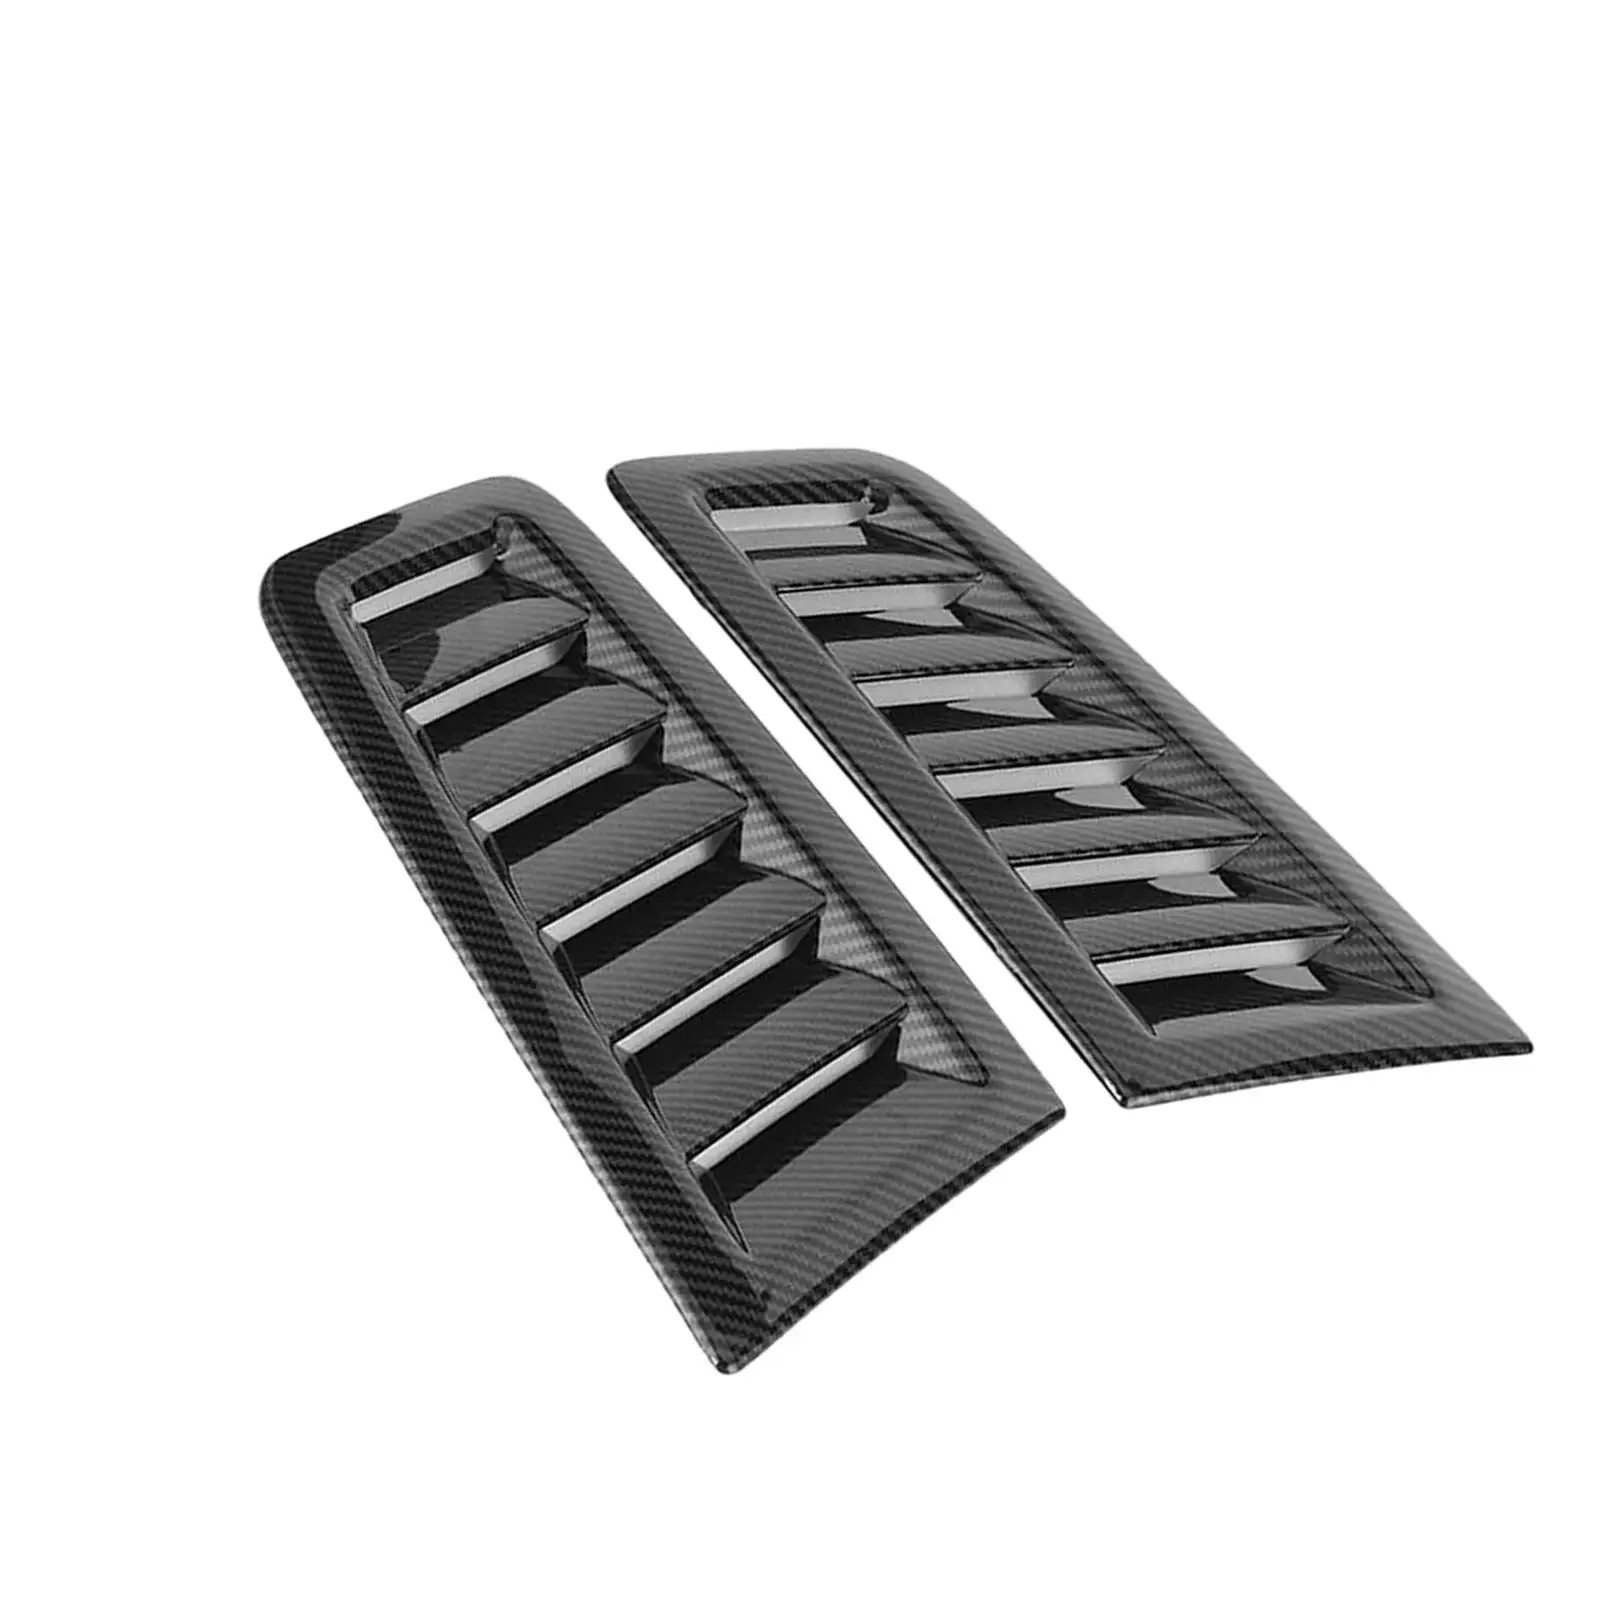 2Pcs Car Hood Vent Scoops Air Intake Hood Vents Bonnet Cover for Ford Focus RS